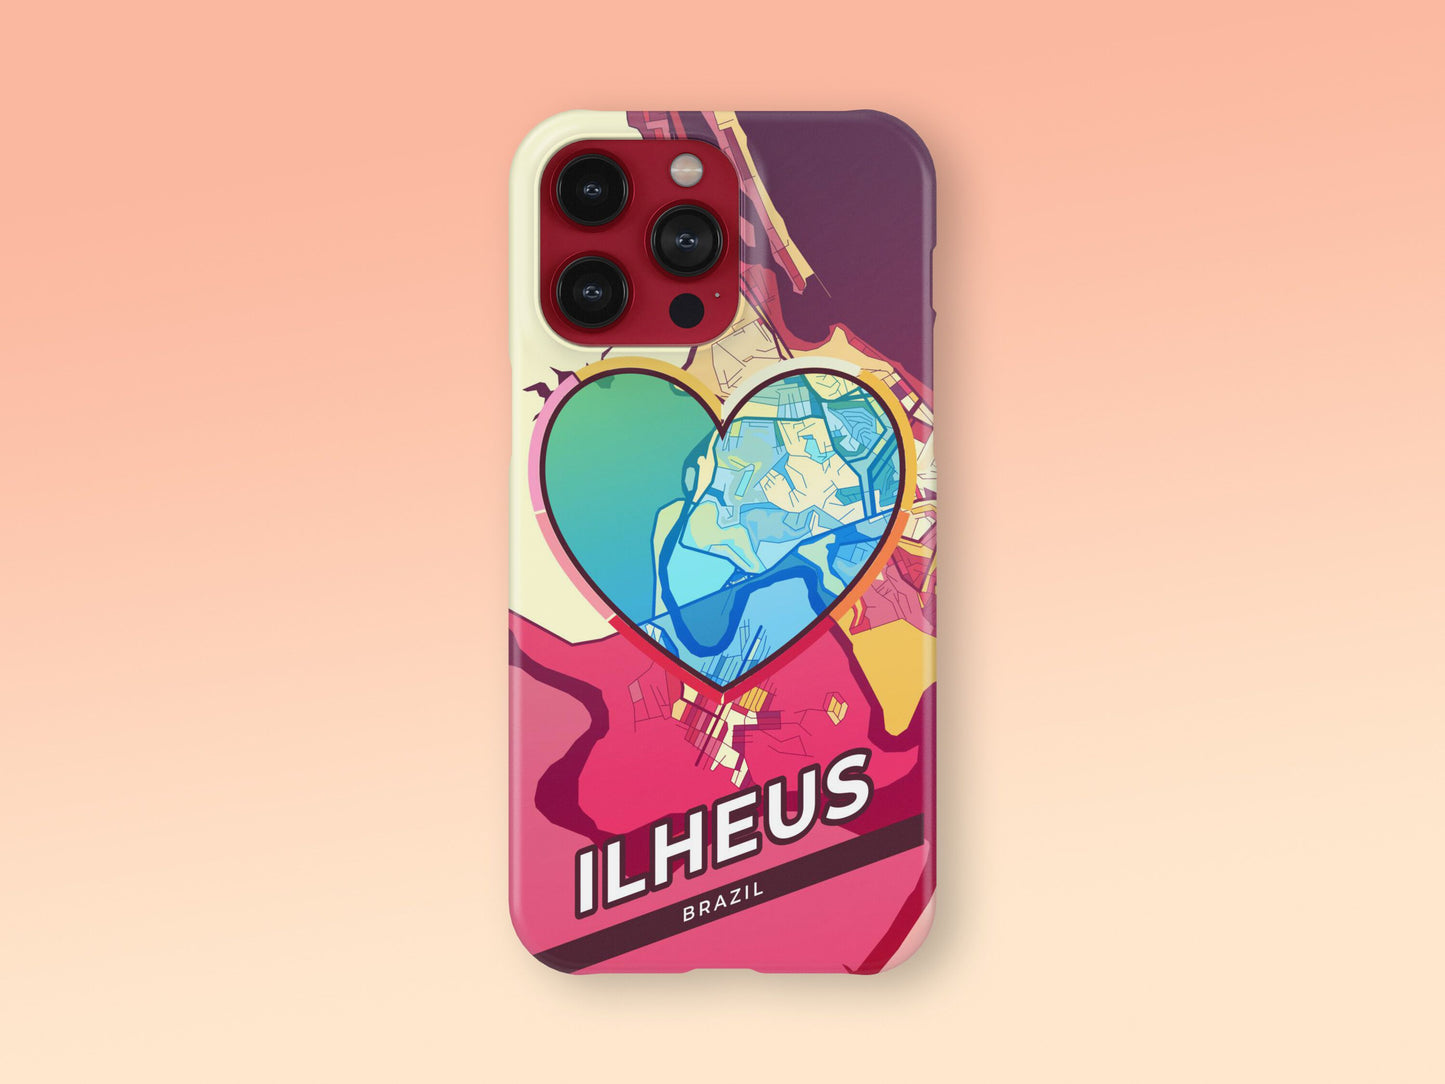 Ilheus Brazil slim phone case with colorful icon. Birthday, wedding or housewarming gift. Couple match cases. 2